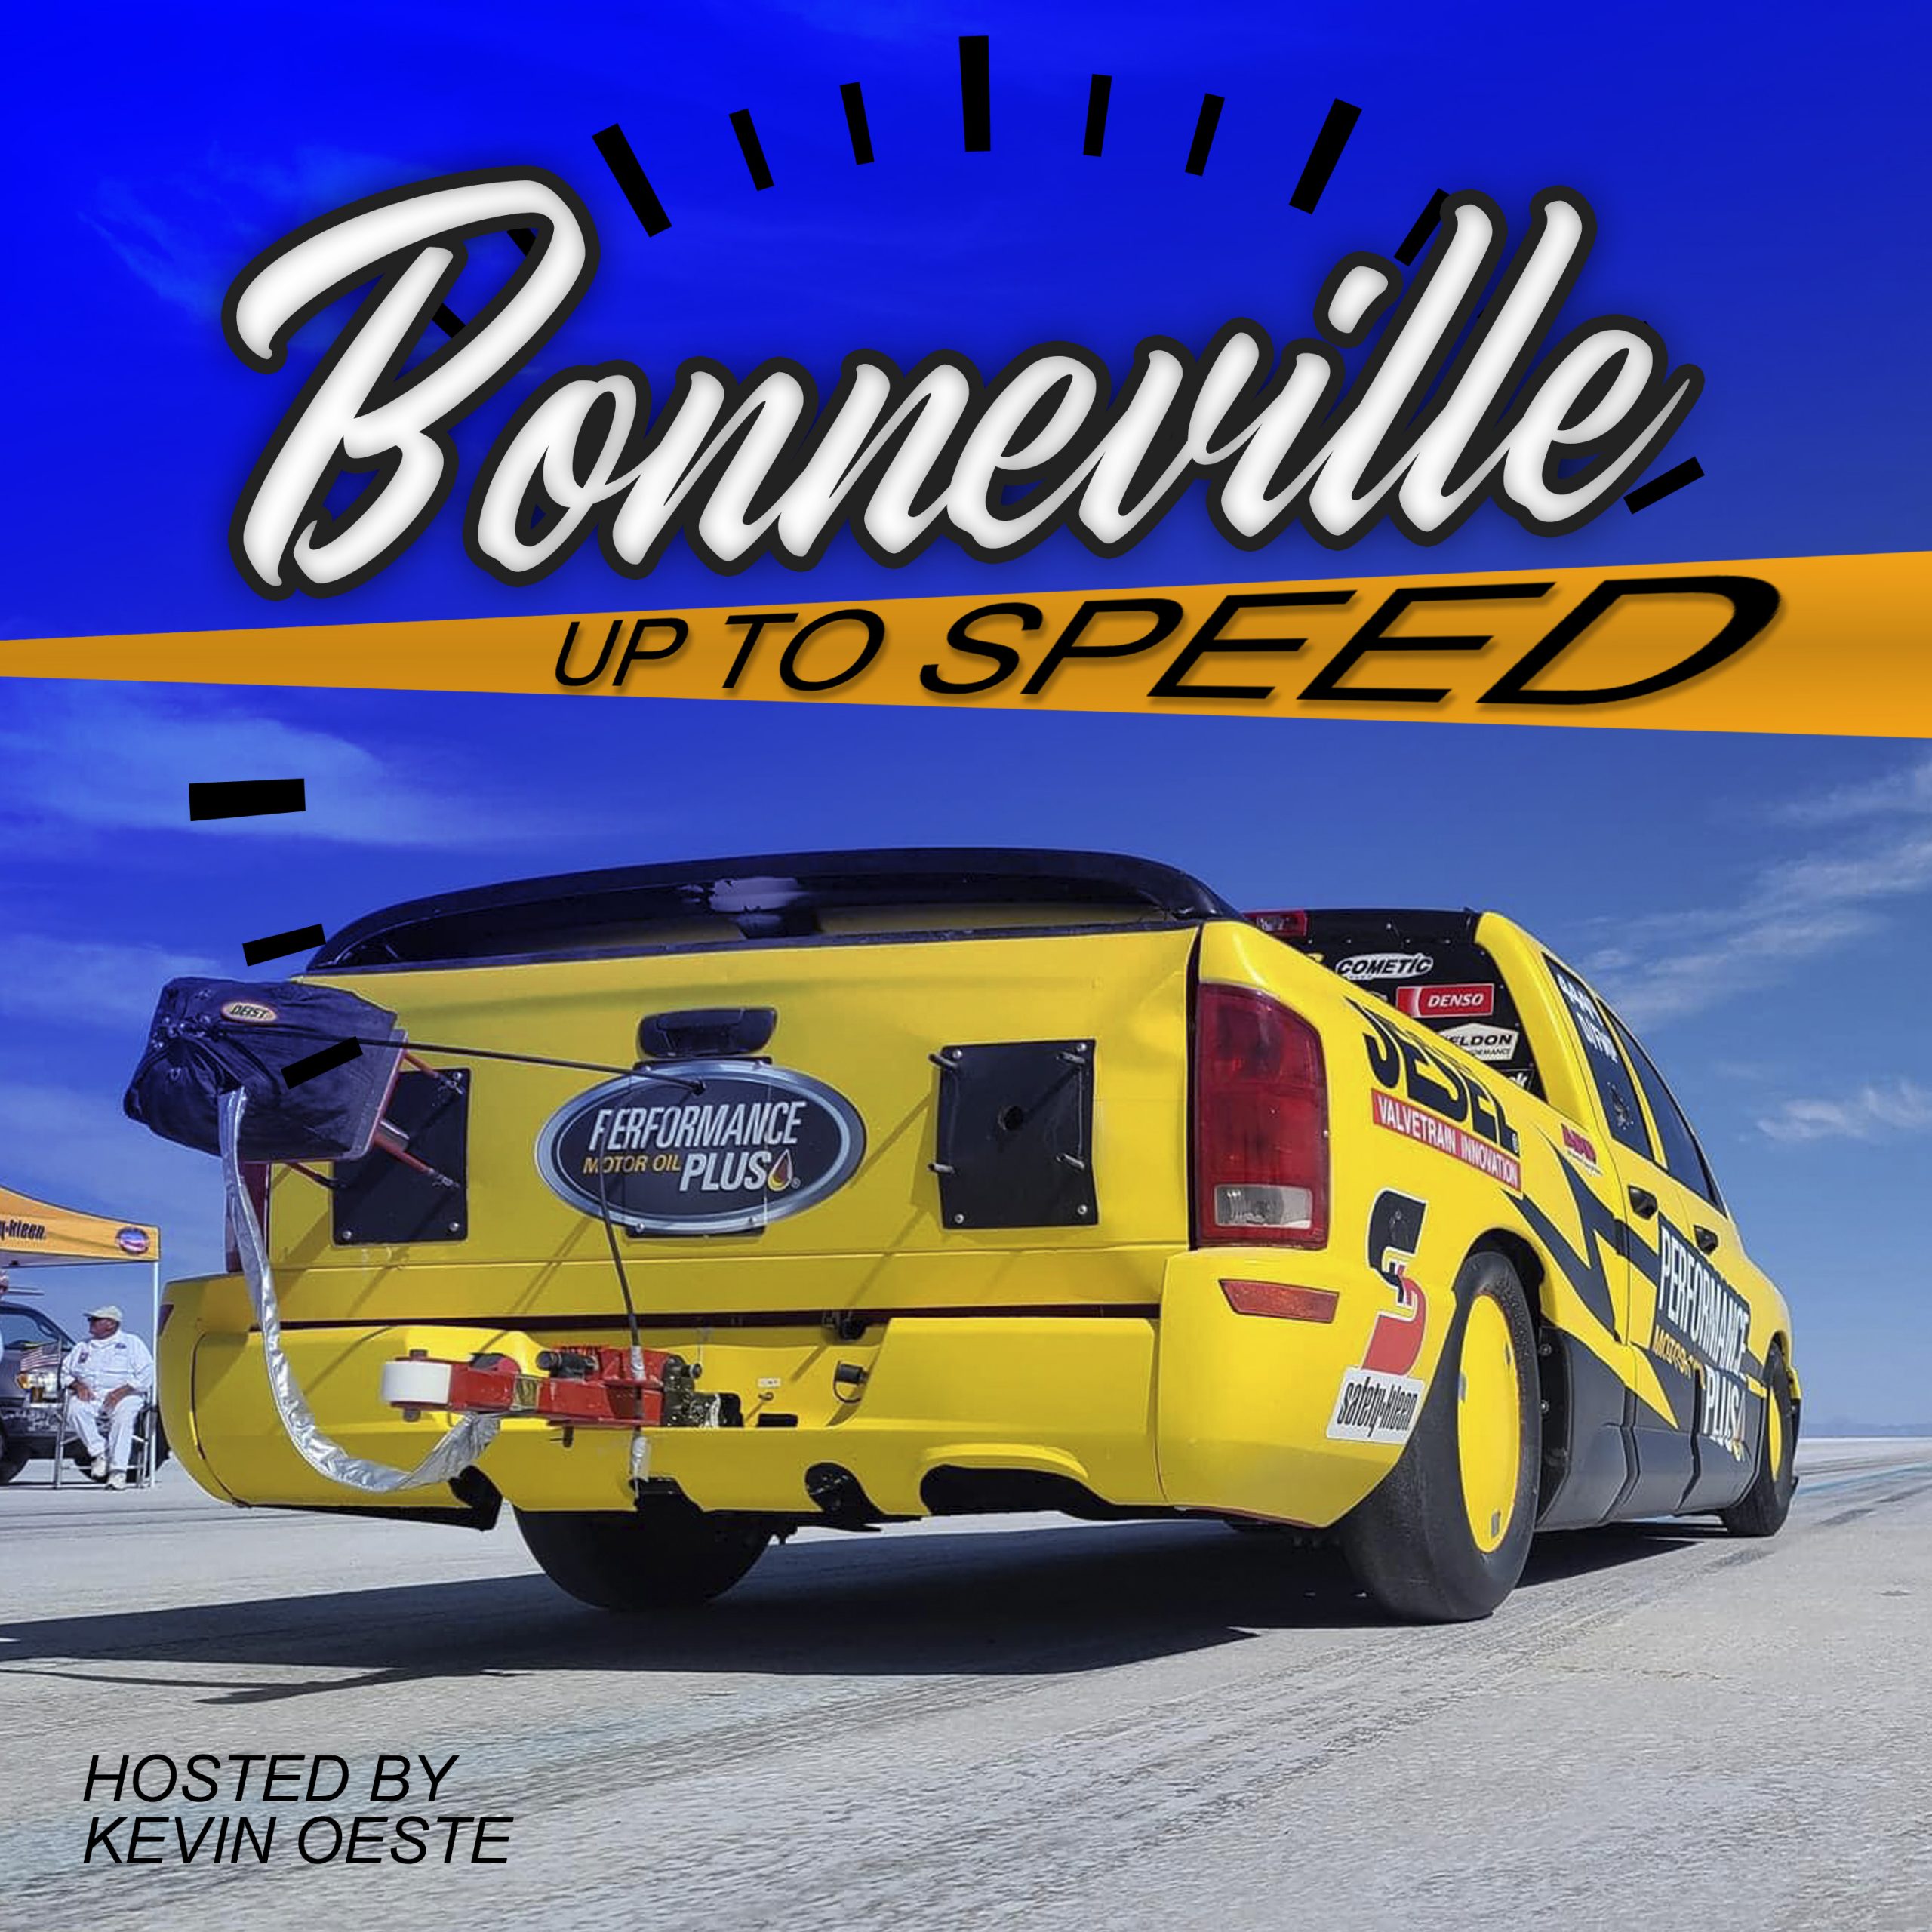 Wayne Jesel Interview on the Bonneville Up To Speed Podcast